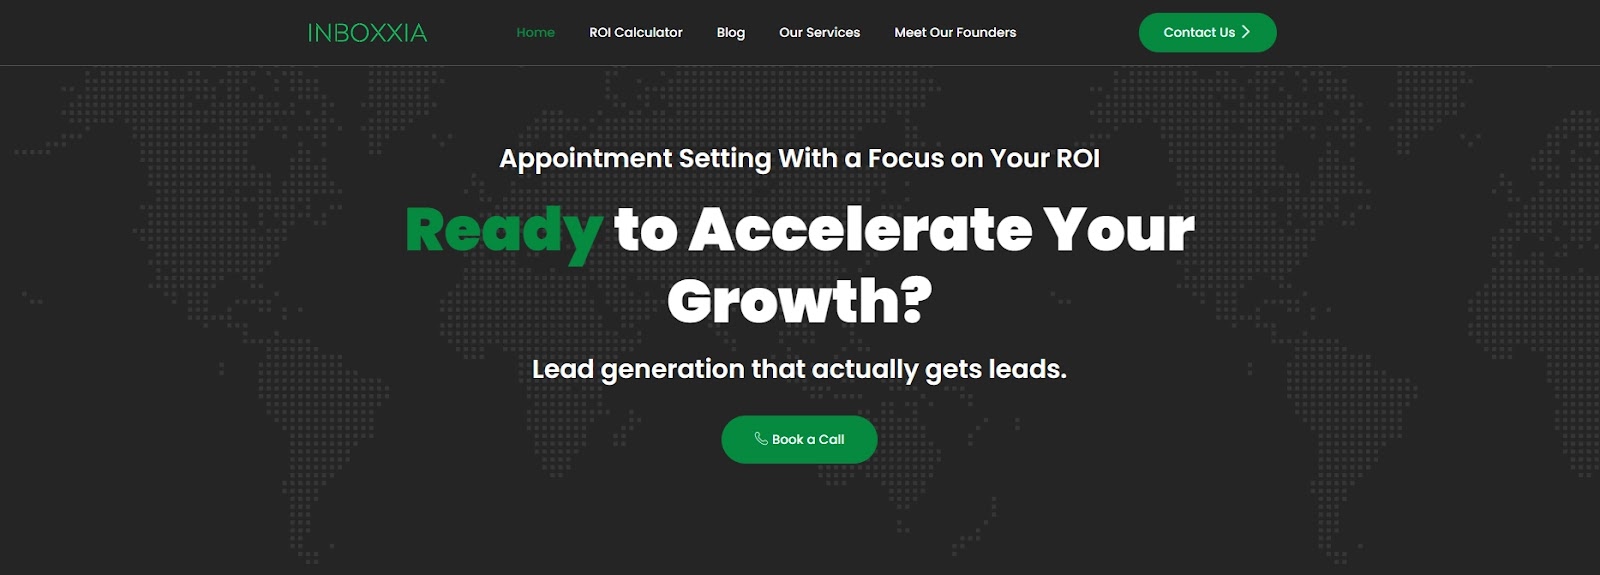 Inboxxia is a UK based lead generation company.